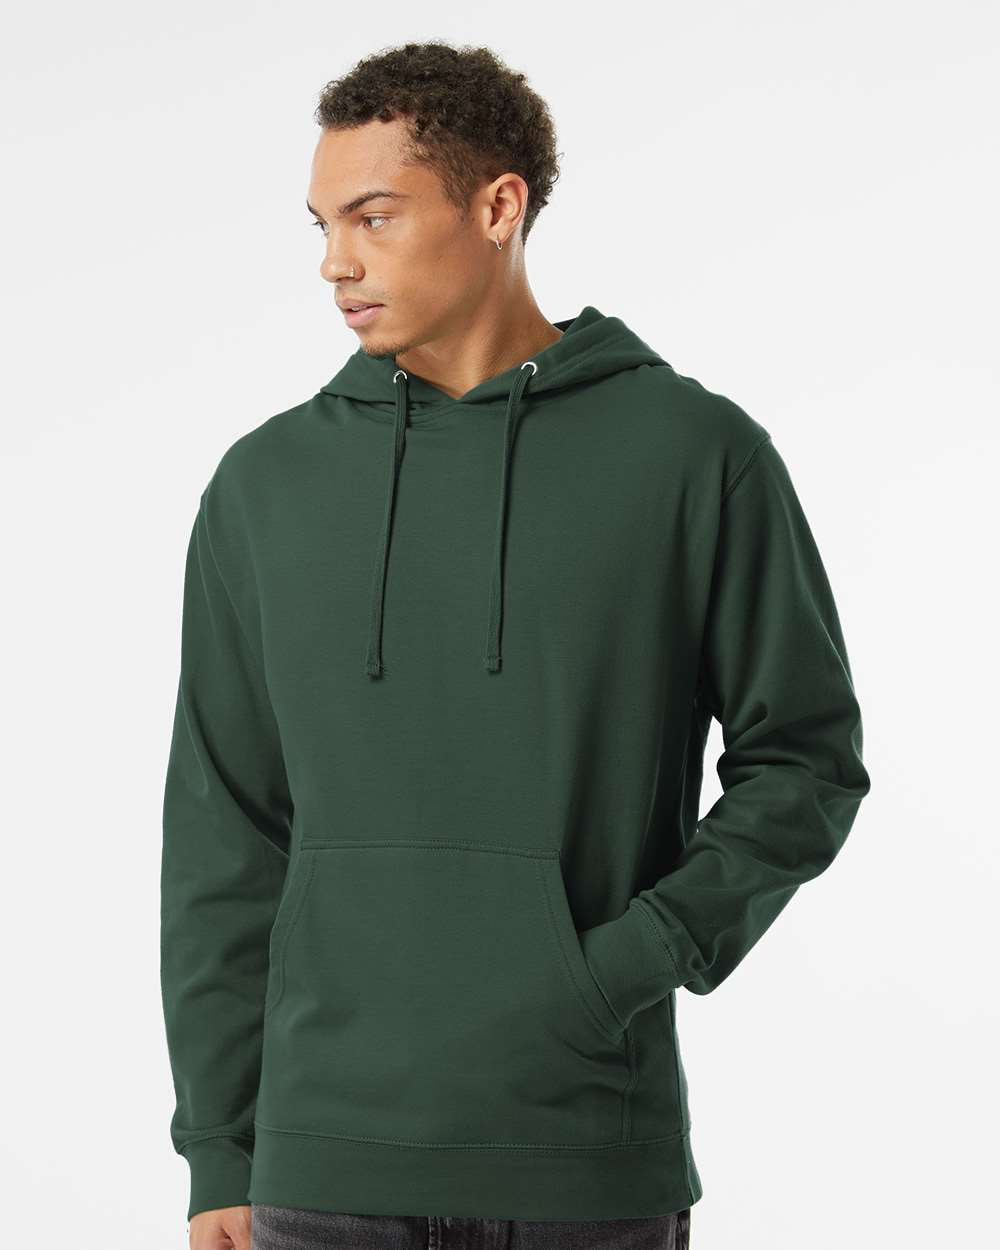 Independent Trading Co. Midweight Hooded Sweatshirt SS4500 Alpine Green XL  